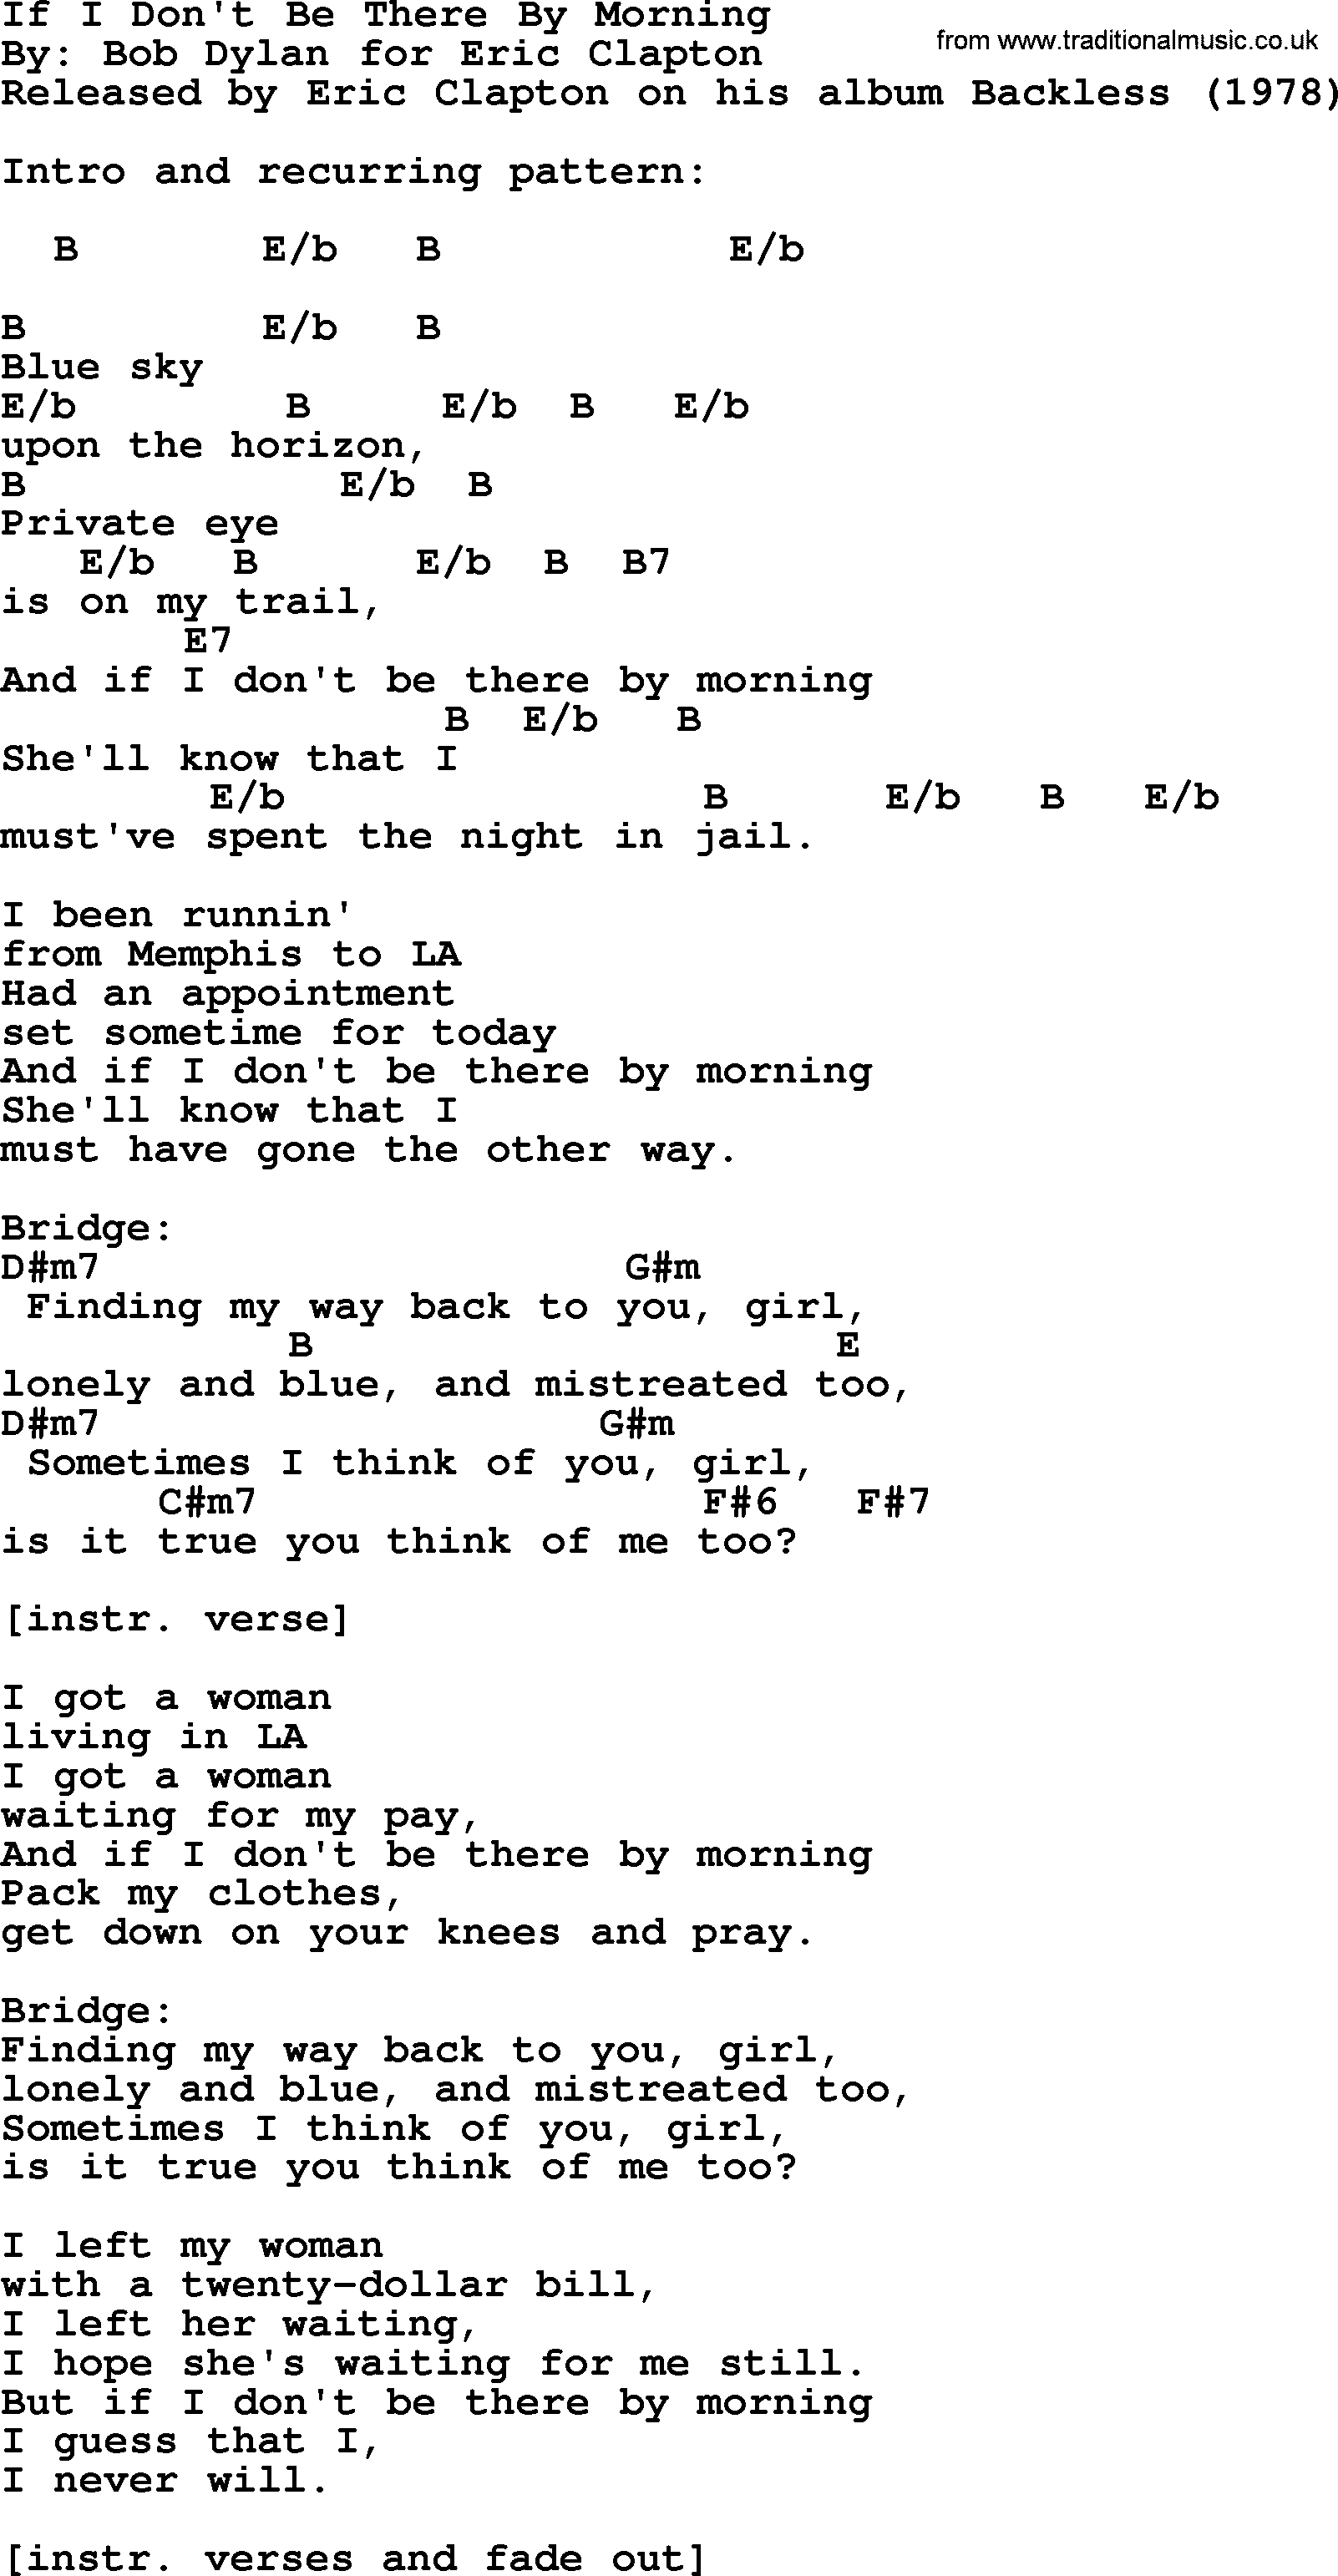 Bob Dylan song, lyrics with chords - If I Don't Be There By Morning